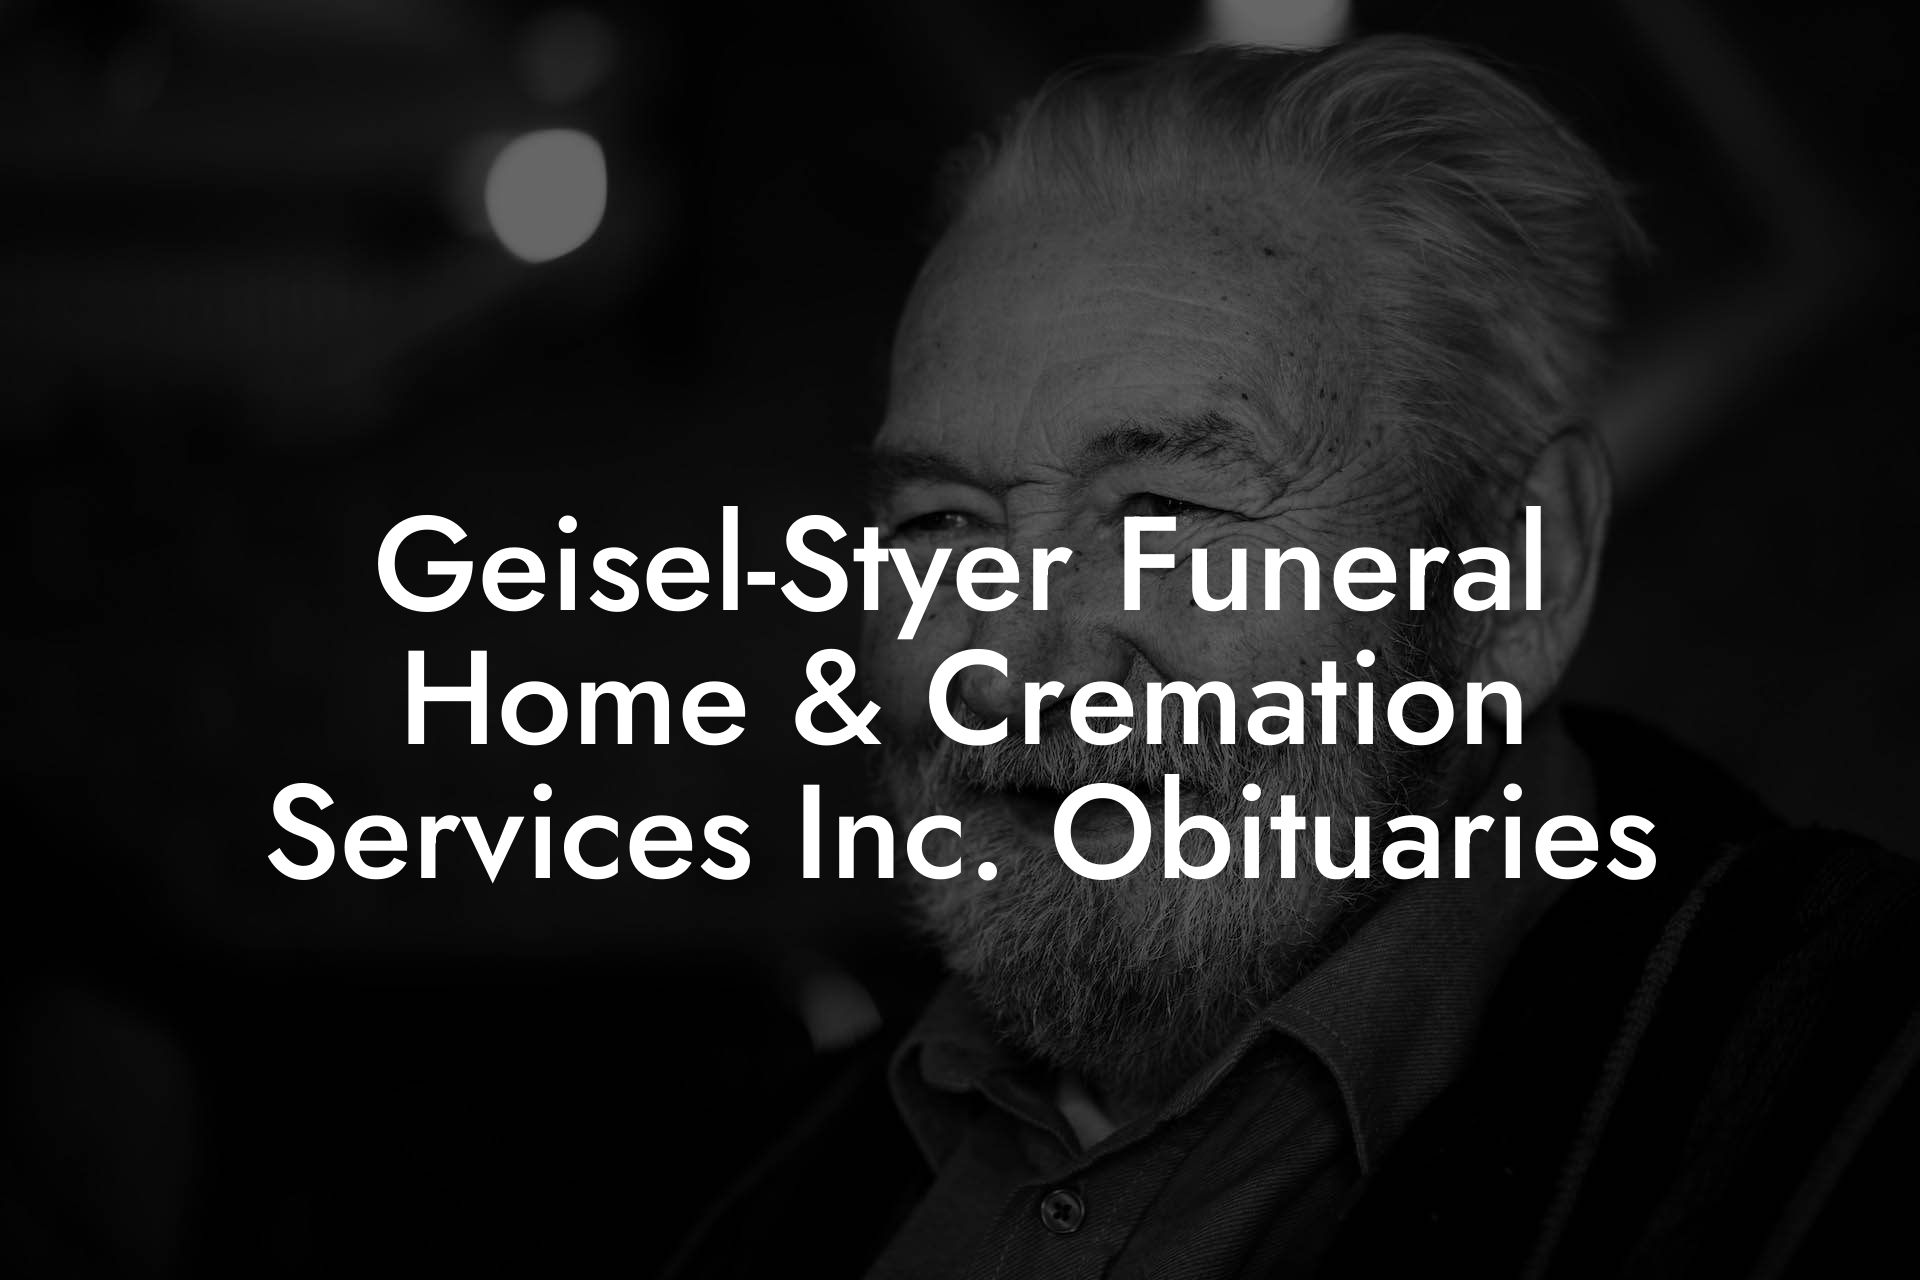 Geisel-Styer Funeral Home & Cremation Services Inc. Obituaries